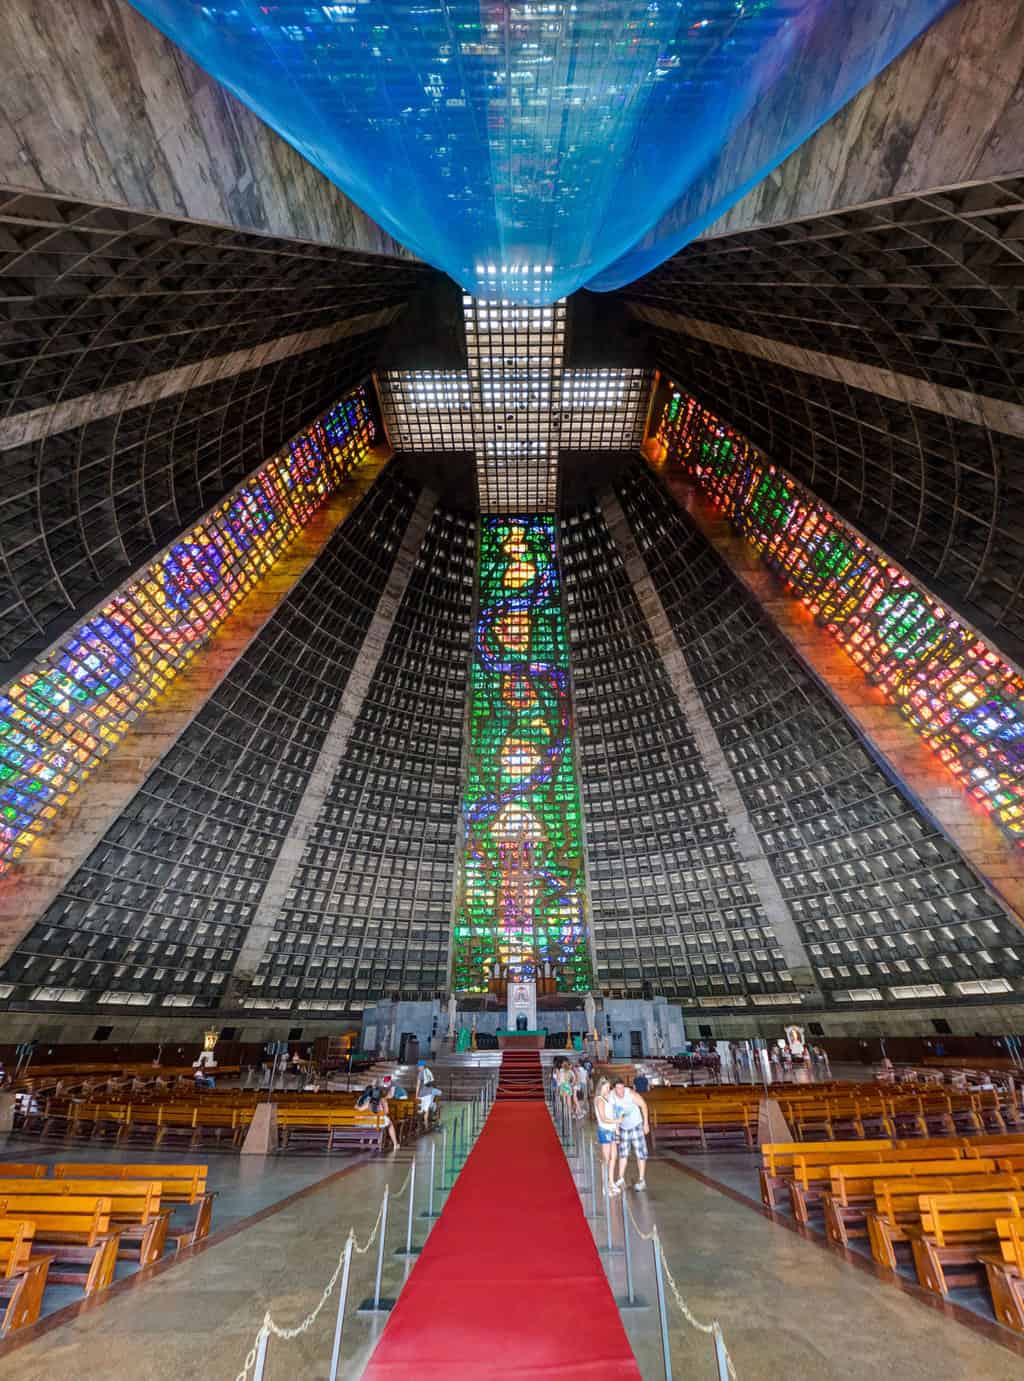 Stain glass windows reaching up the length of the Pyramid Mayan style cathedral.